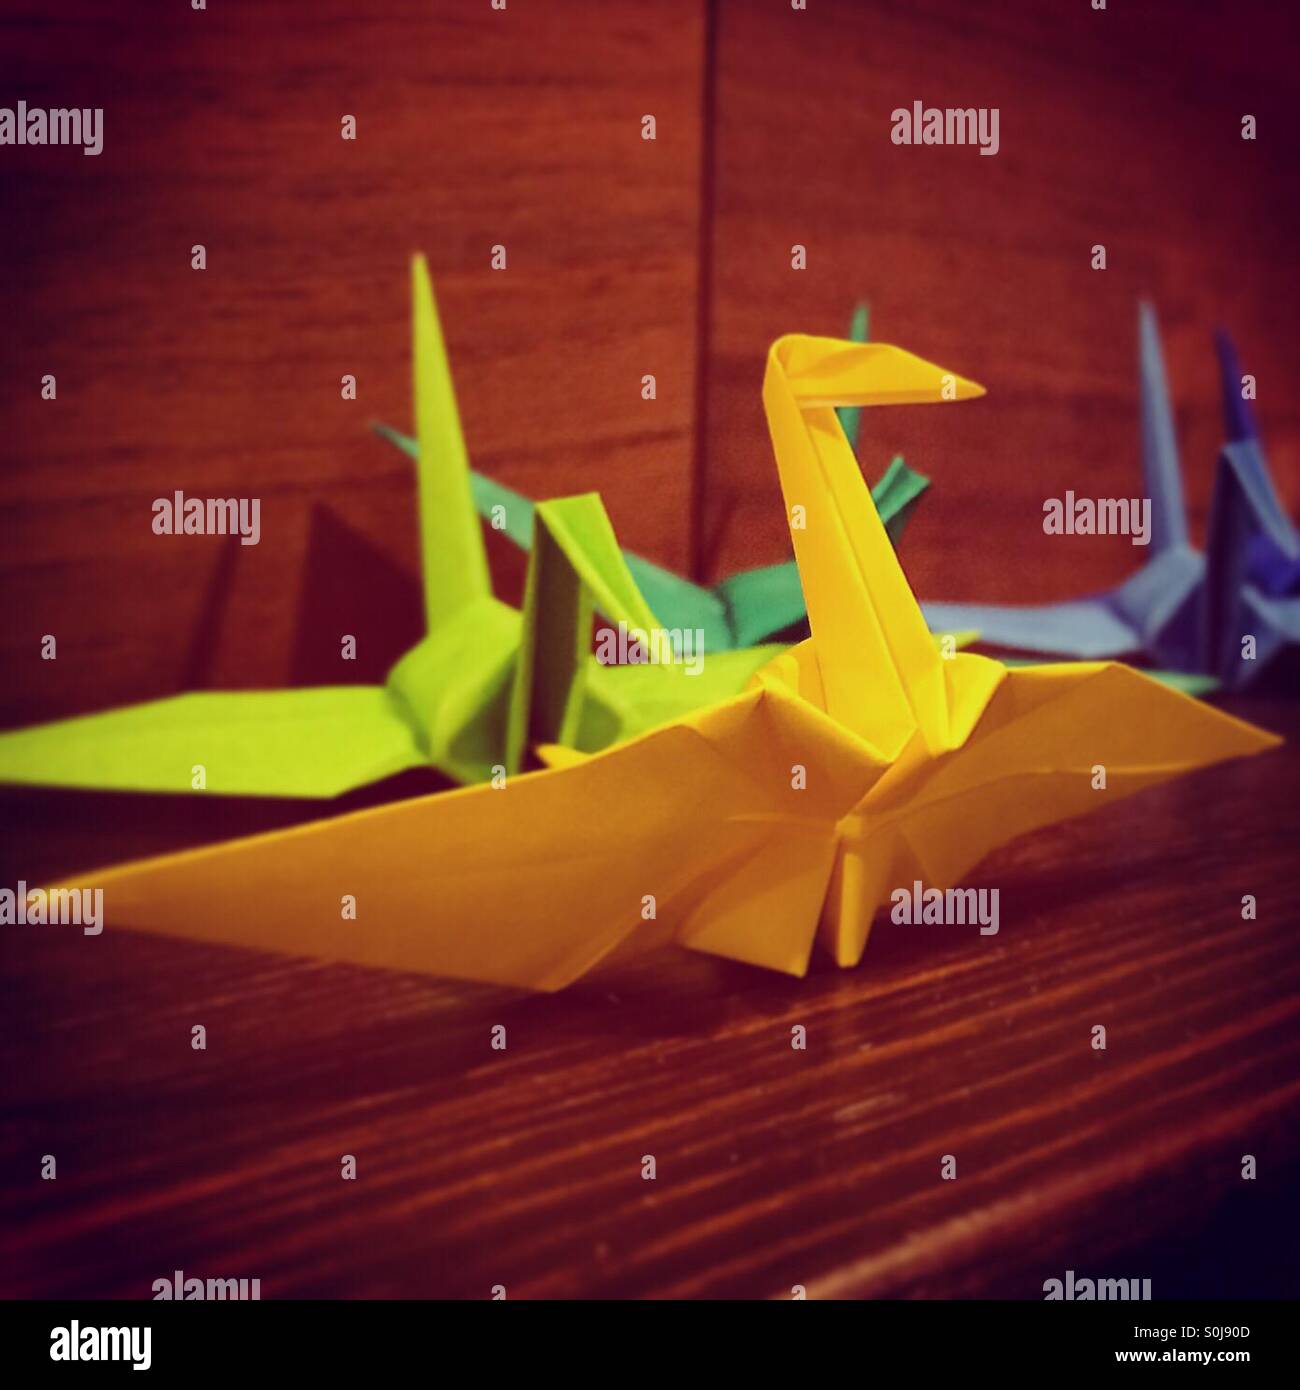 Origami birds made with colored paper Stock Photo